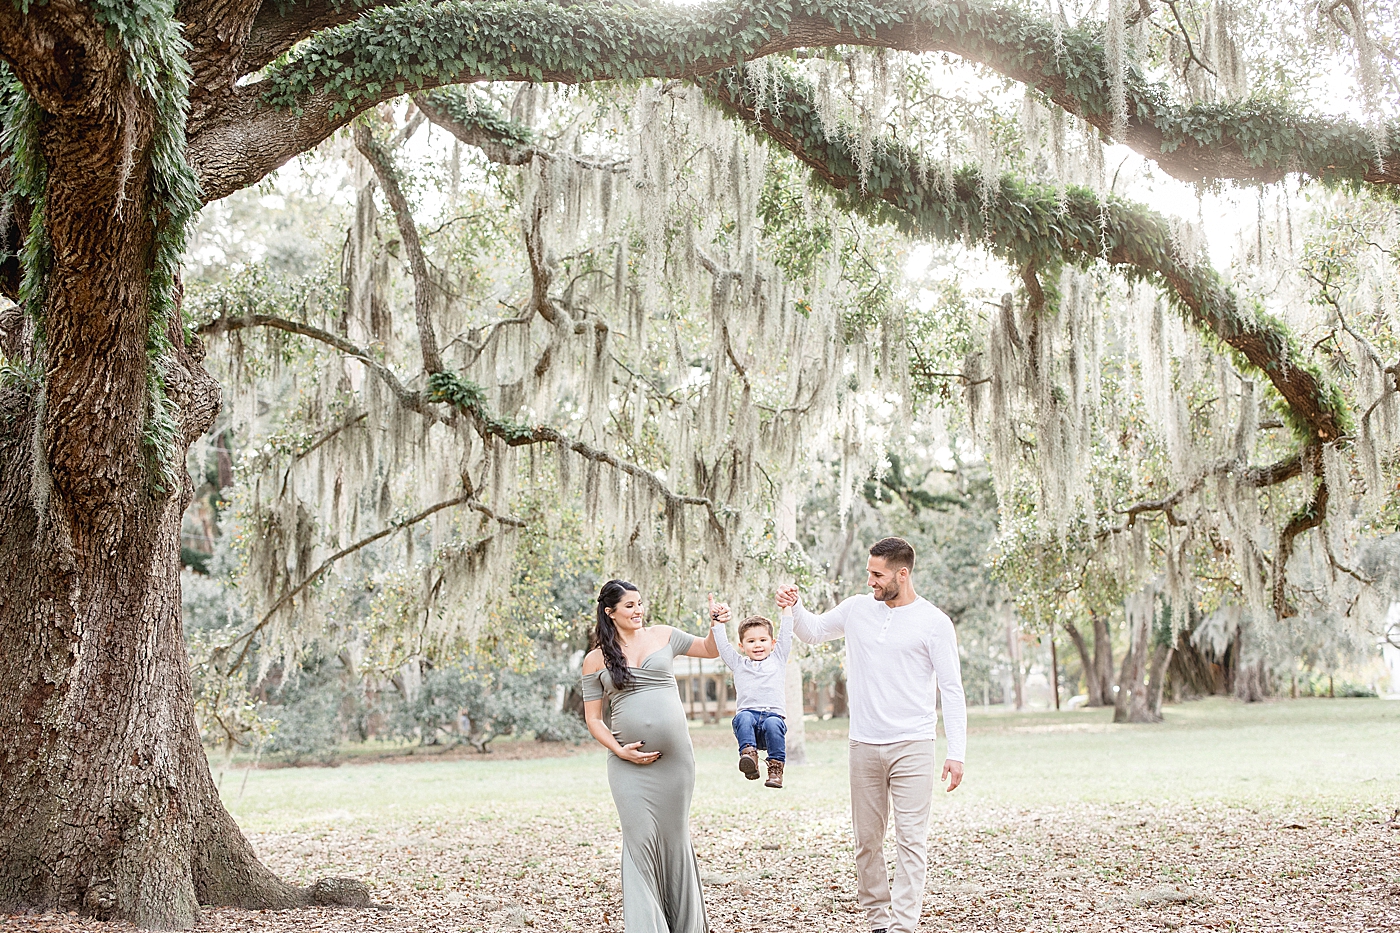 Mom and Dad, Kevin Kiiermaier, swinging son under the oak trees in Tampa, FL. Photo by Brittany Elise Photography.